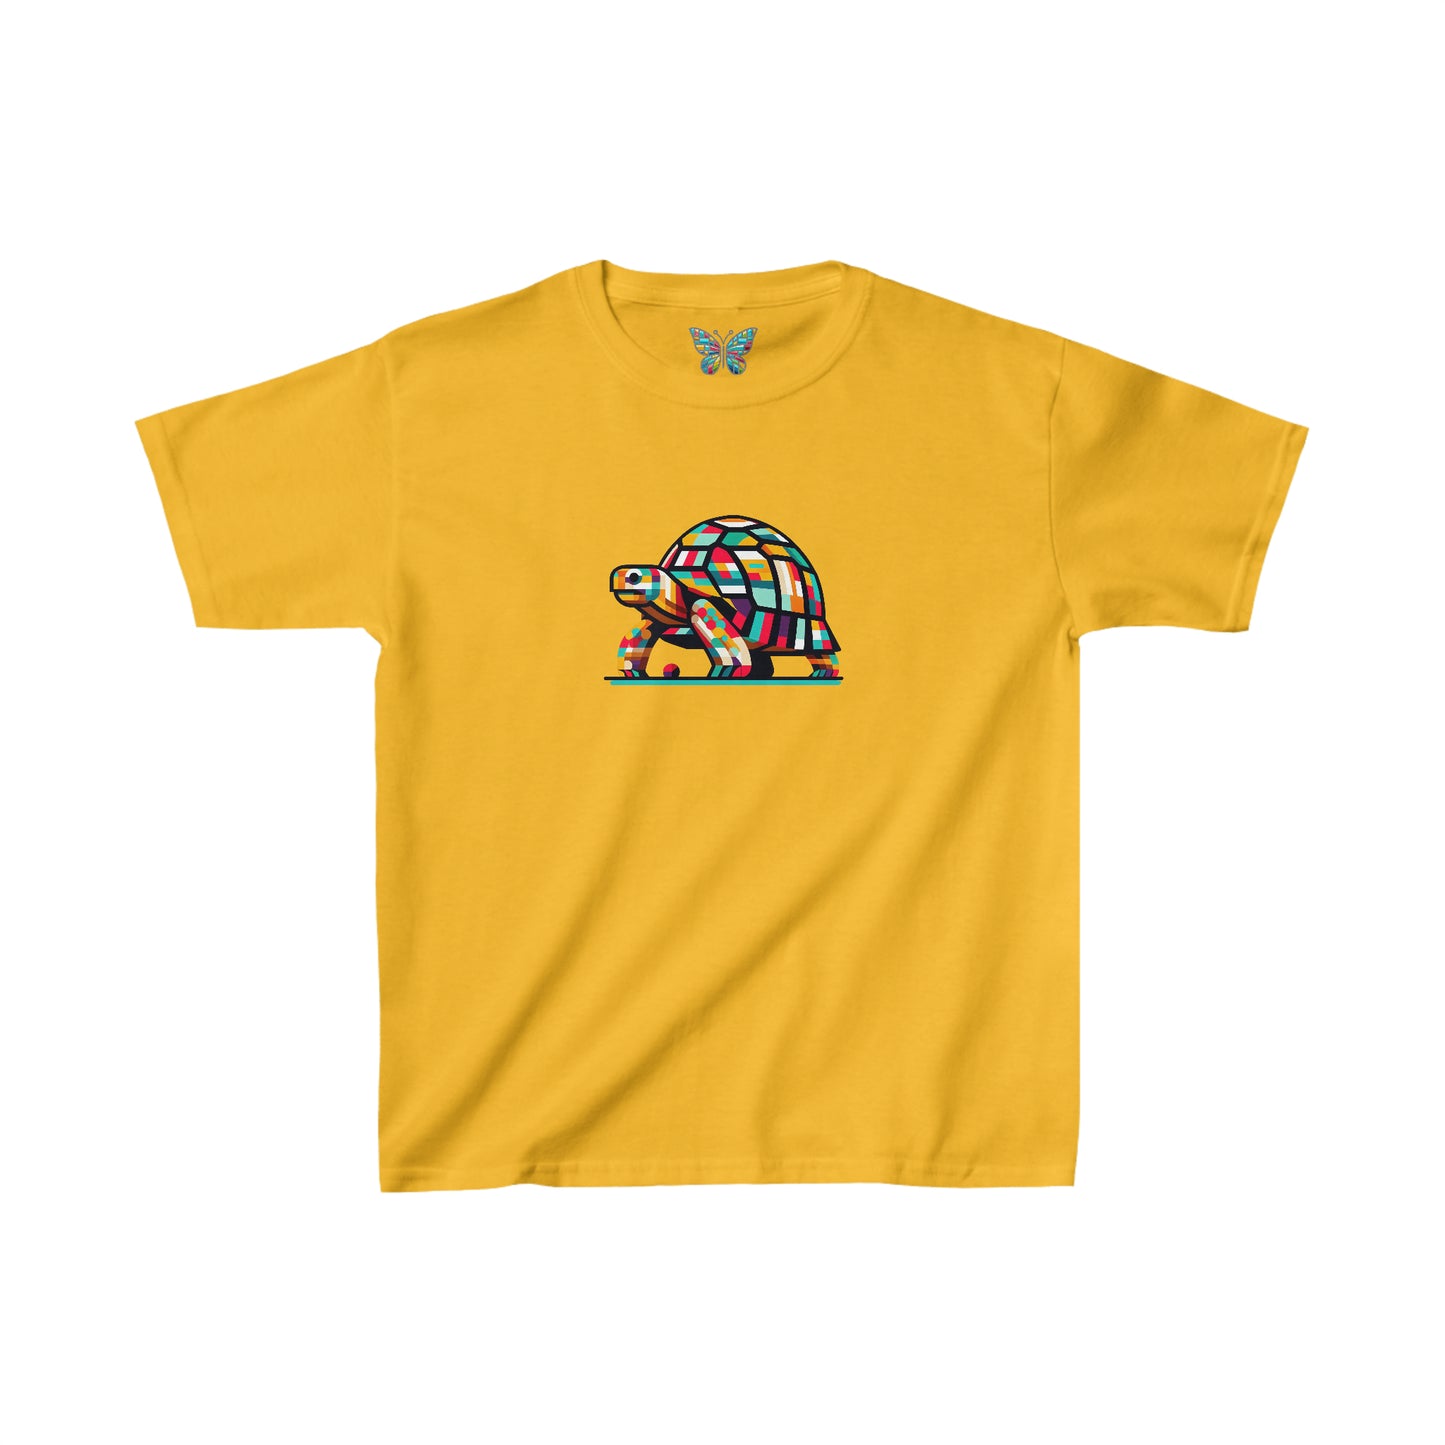 Gopher Tortoise Serenique - Youth - Snazzle Tee